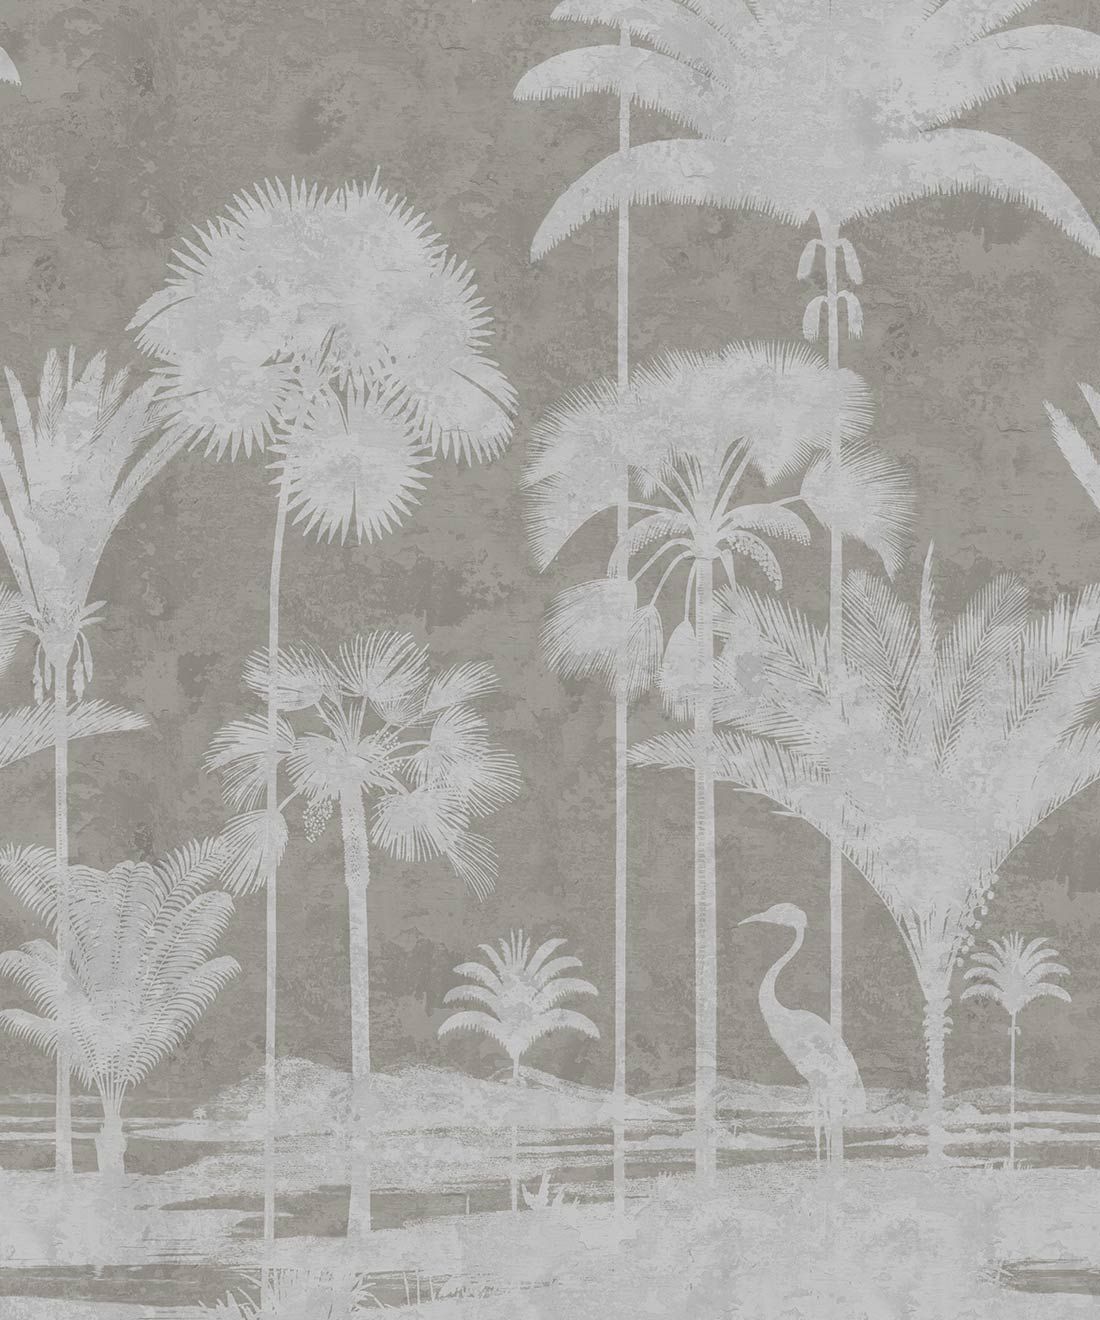 Shadow Palms Wallpaper Mural •Bethany Linz • Palm Tree Mural • Beige • Swatch